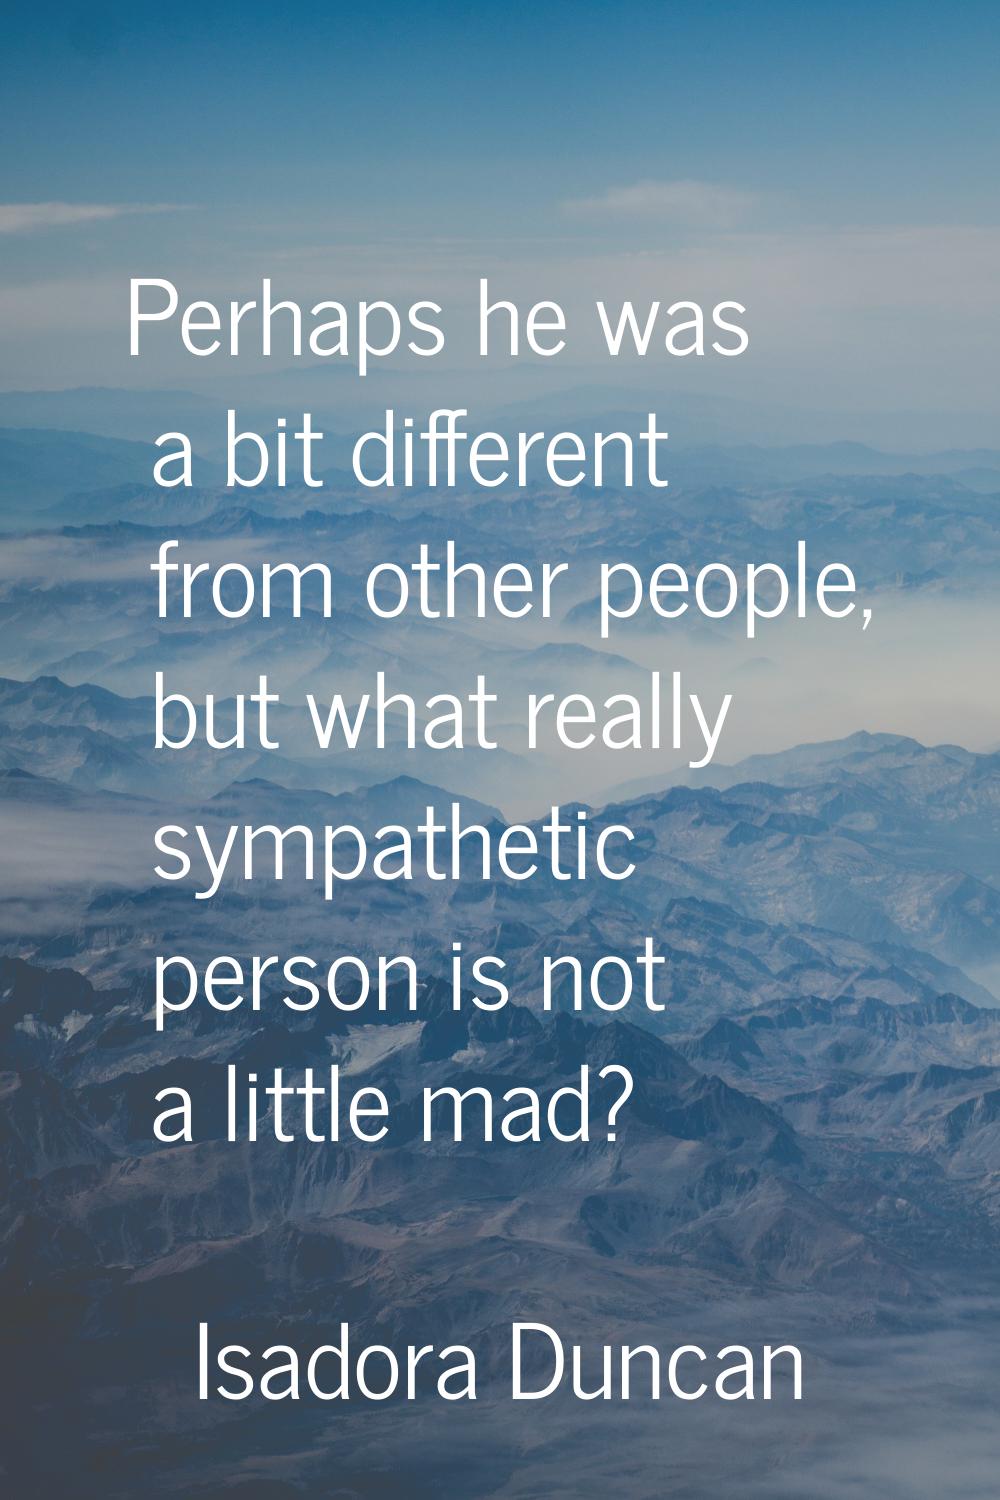 Perhaps he was a bit different from other people, but what really sympathetic person is not a littl